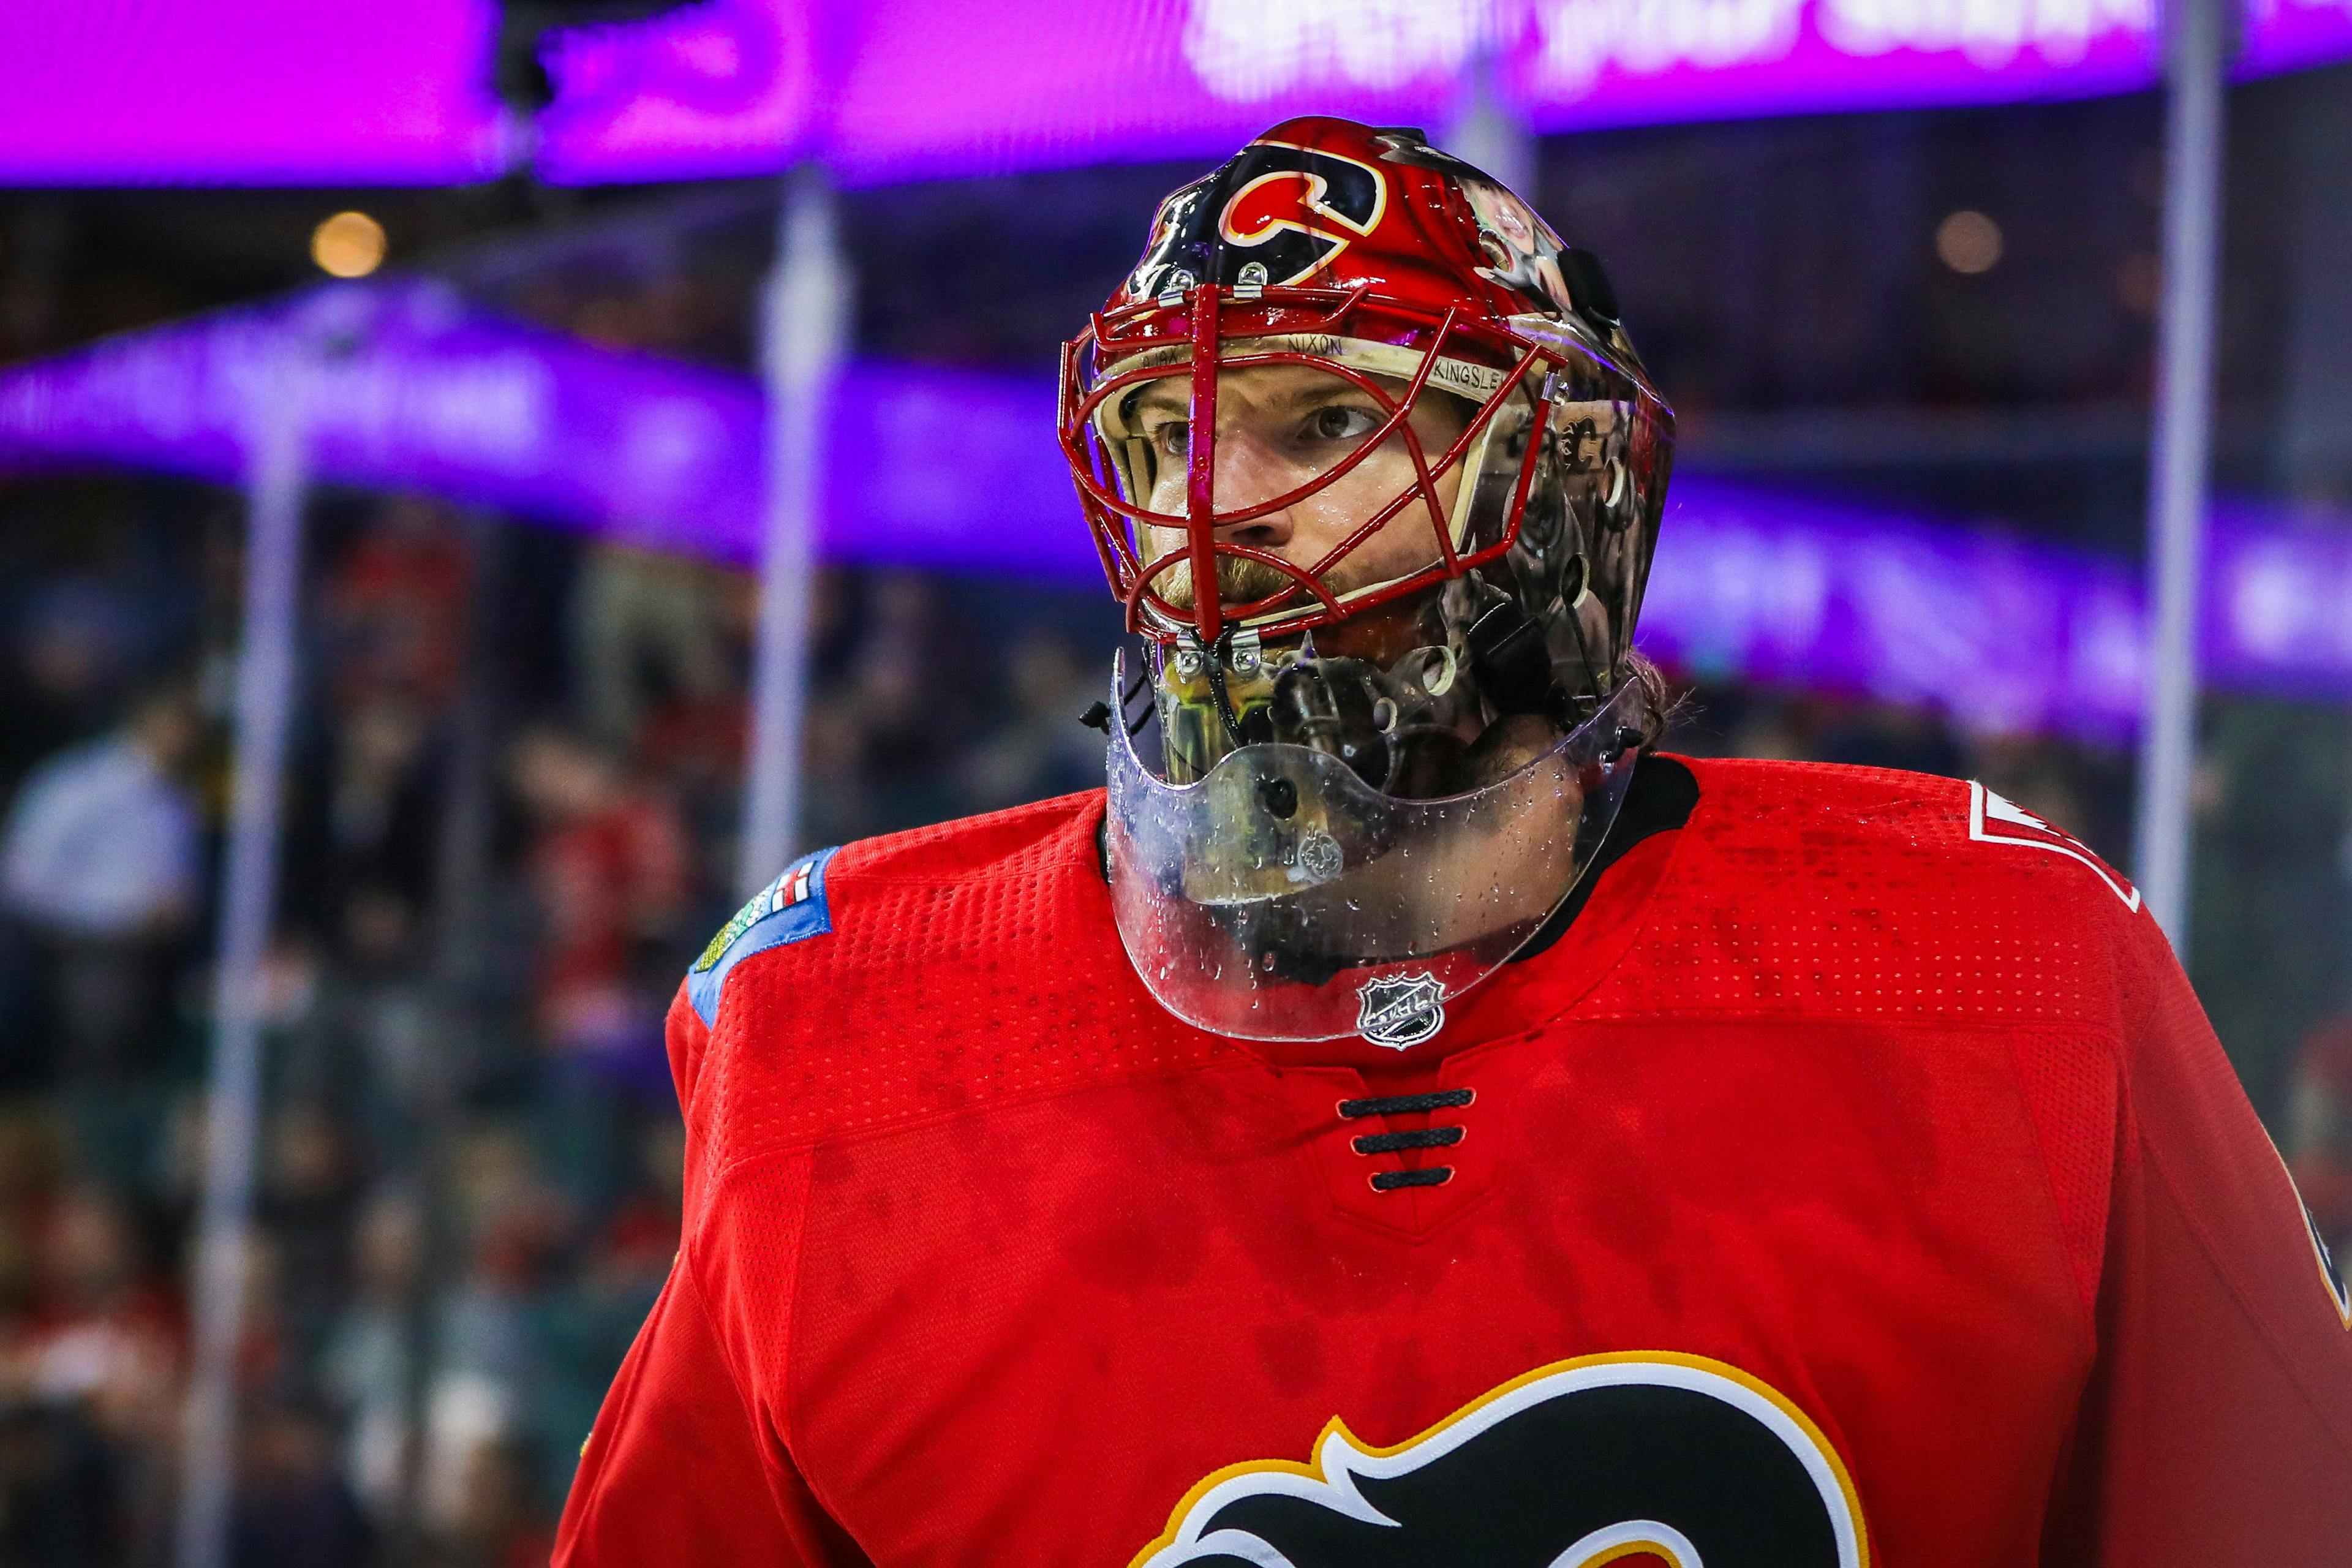 Mike Smith's vintage mask pays tribute to Flames legend - FlamesNation